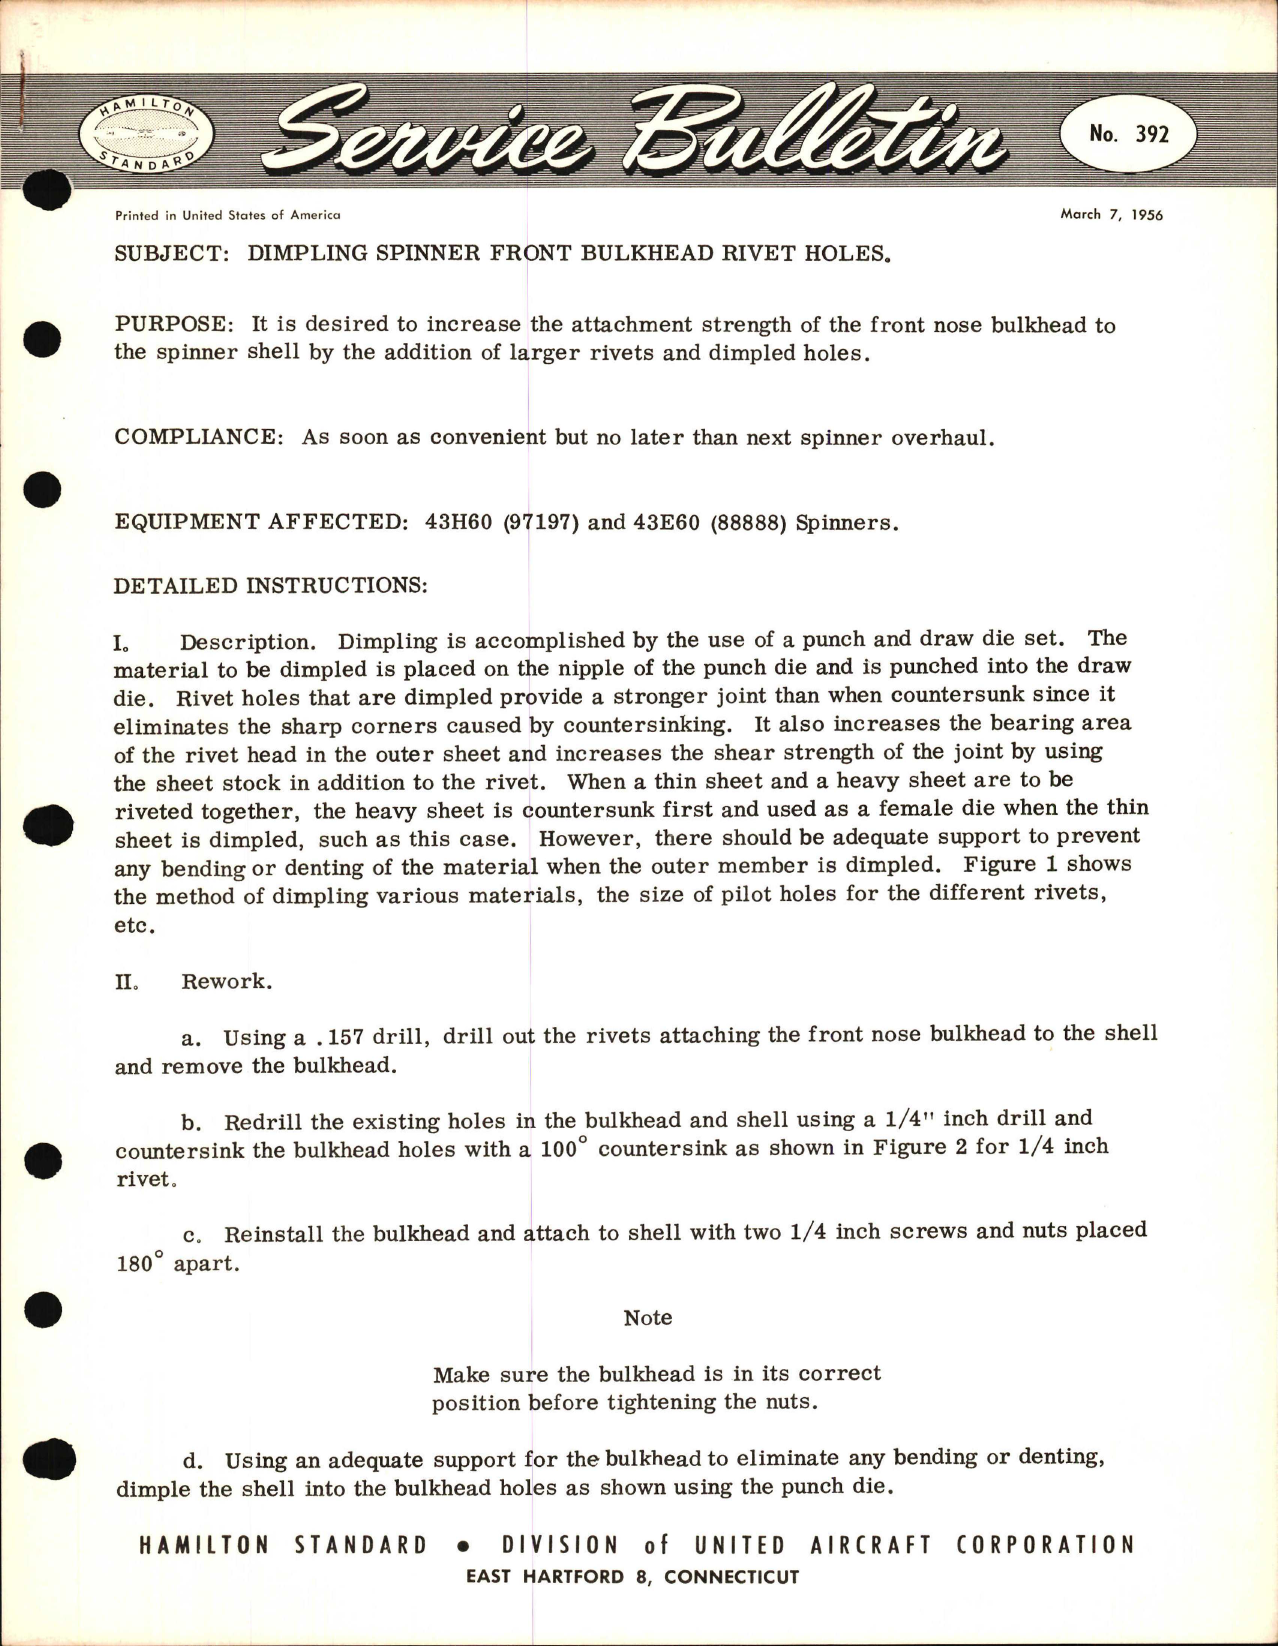 Sample page 1 from AirCorps Library document: Dimpling Spinner Front Bulkhead Rivet Holes